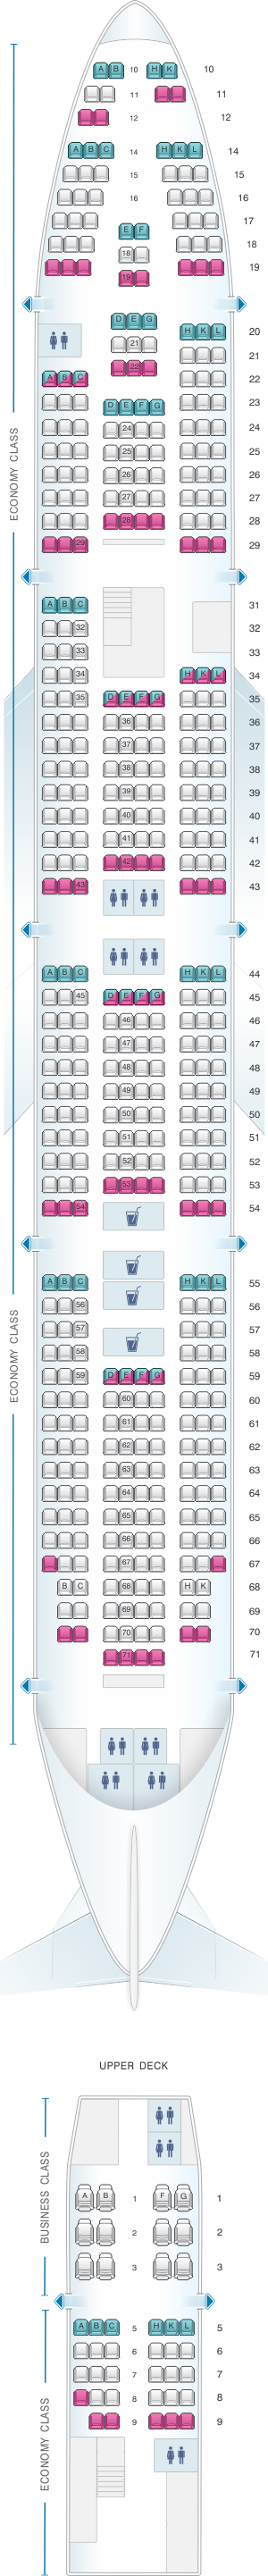 Seat map for Rossiya Airlines Boeing B747 400 V2